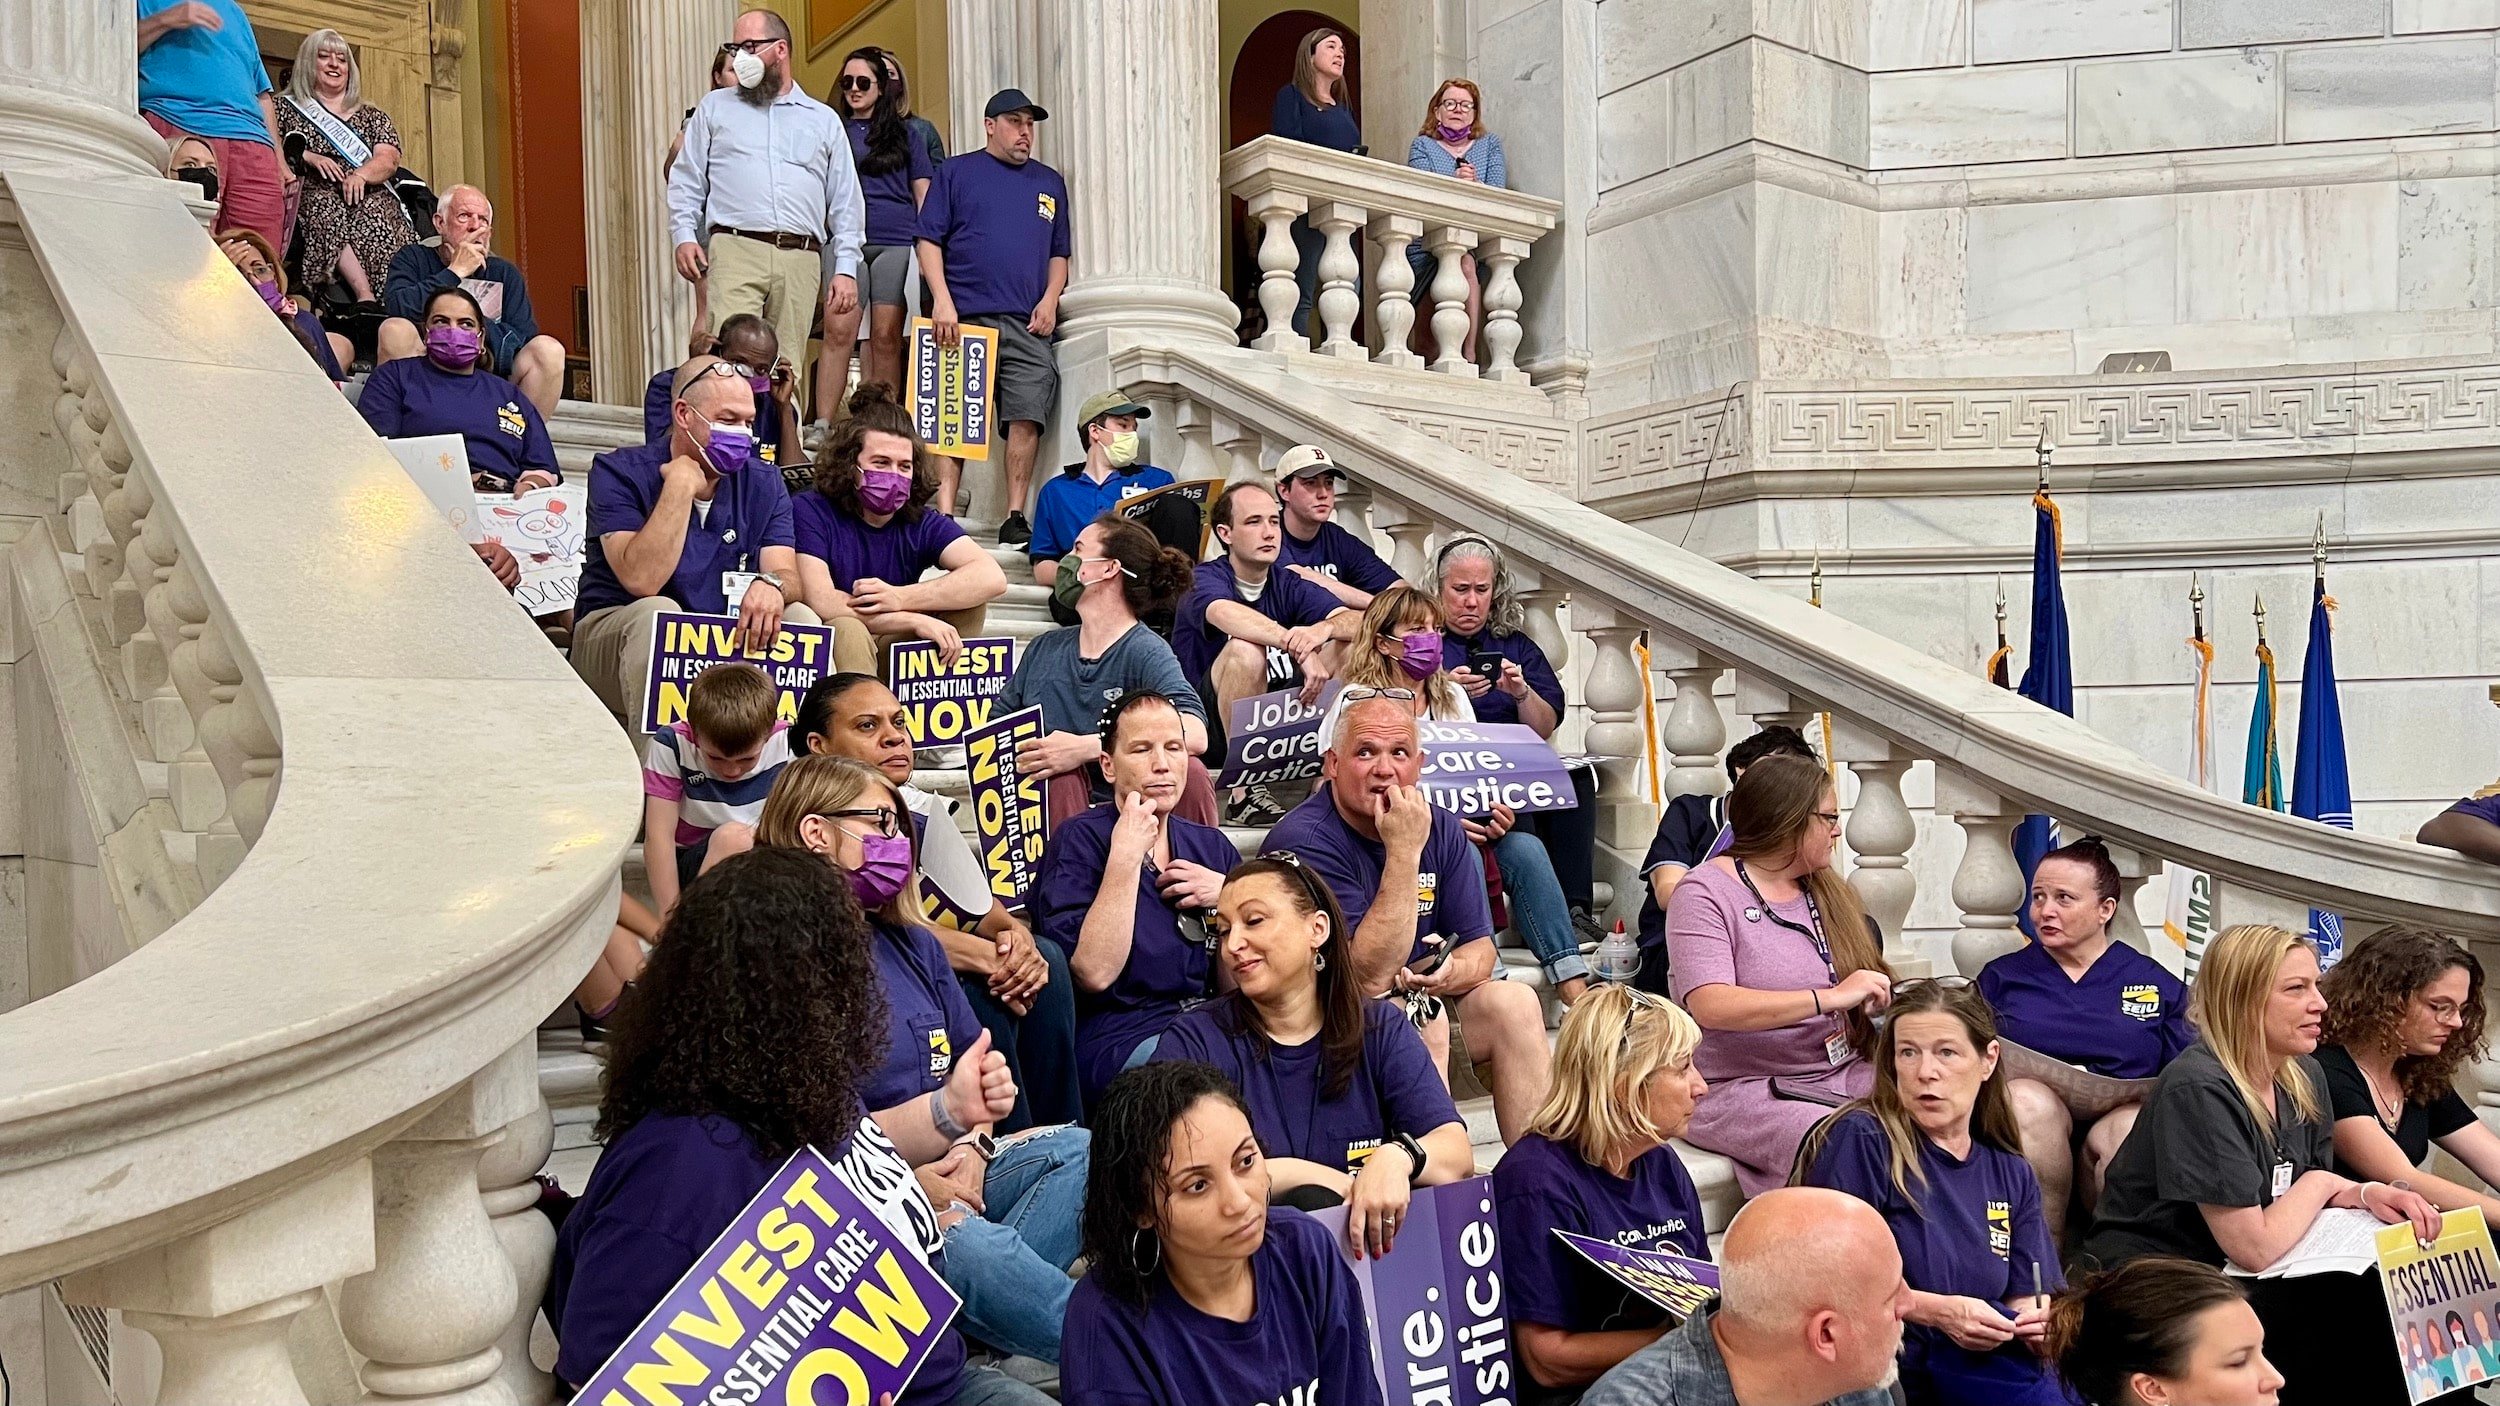 Rhode Island: Essential healthcare workers hold State House rally to demand investment now, not later